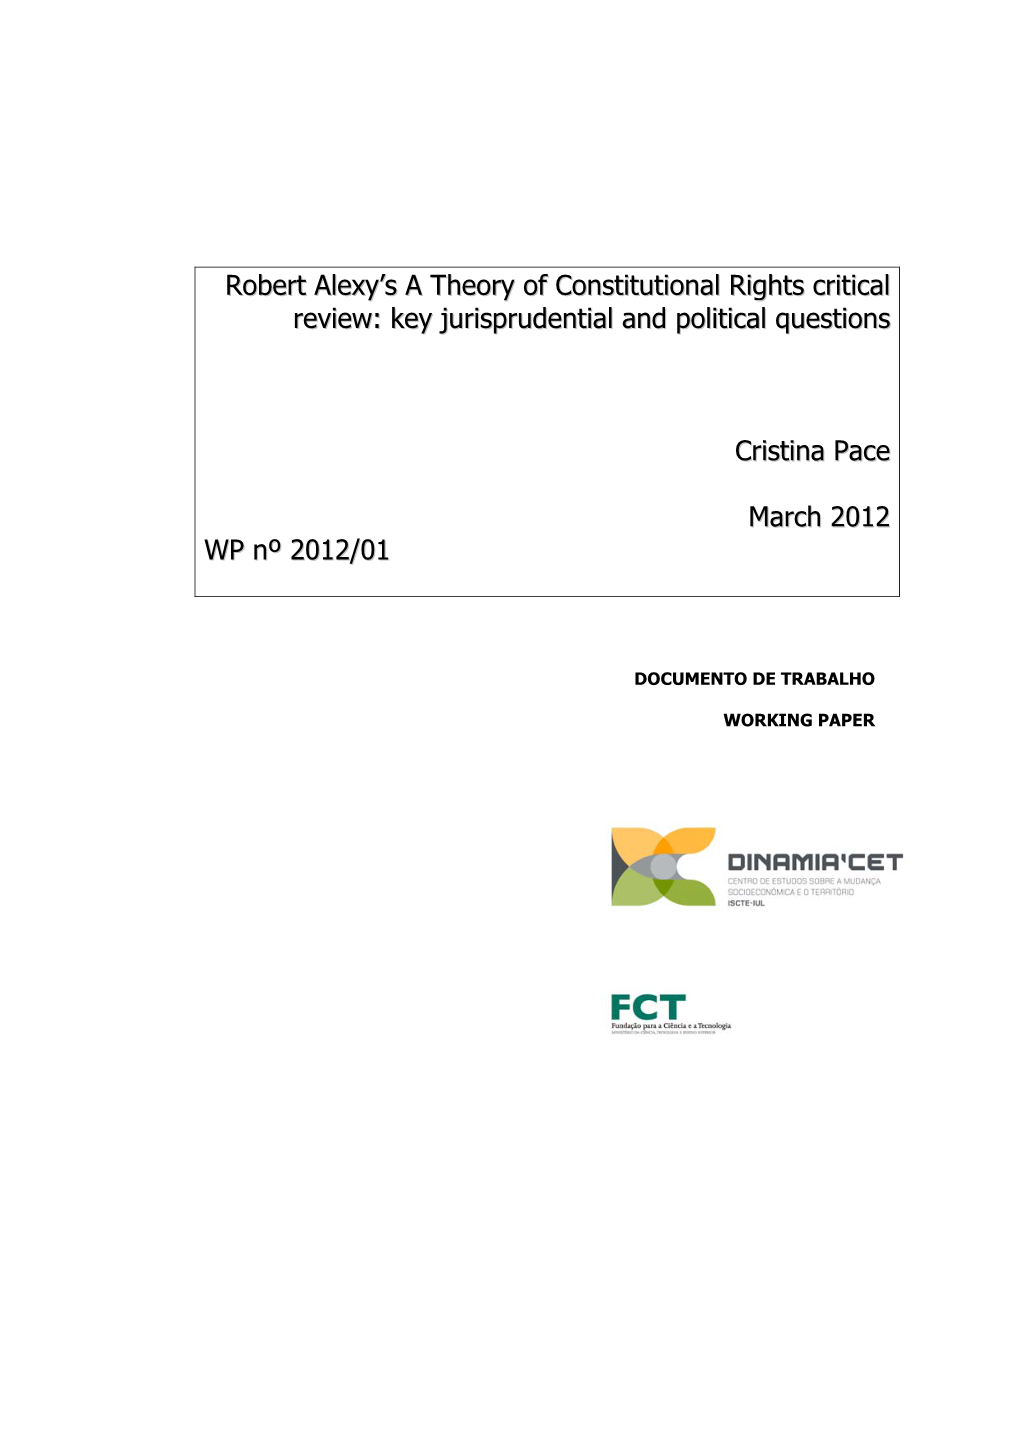 Robert Alexy's a Theory of Constitutional Rights Critical Review